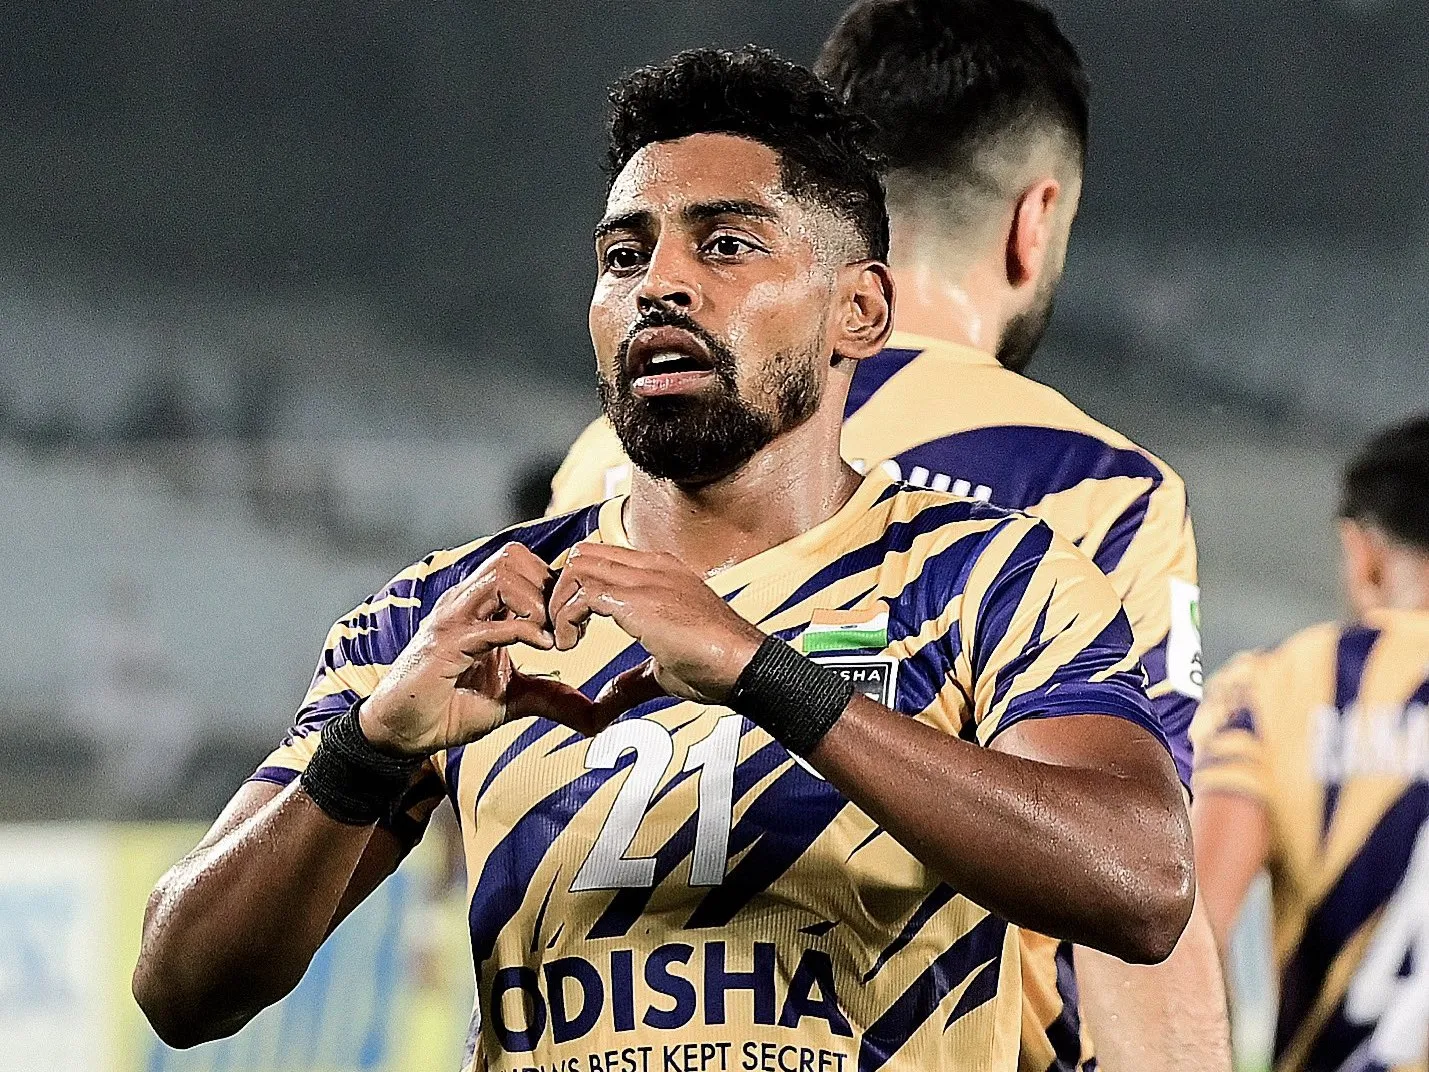 Roy Krishna with his trademark celebration after his goal against Mohun Bagan.  Image | Odisha FC